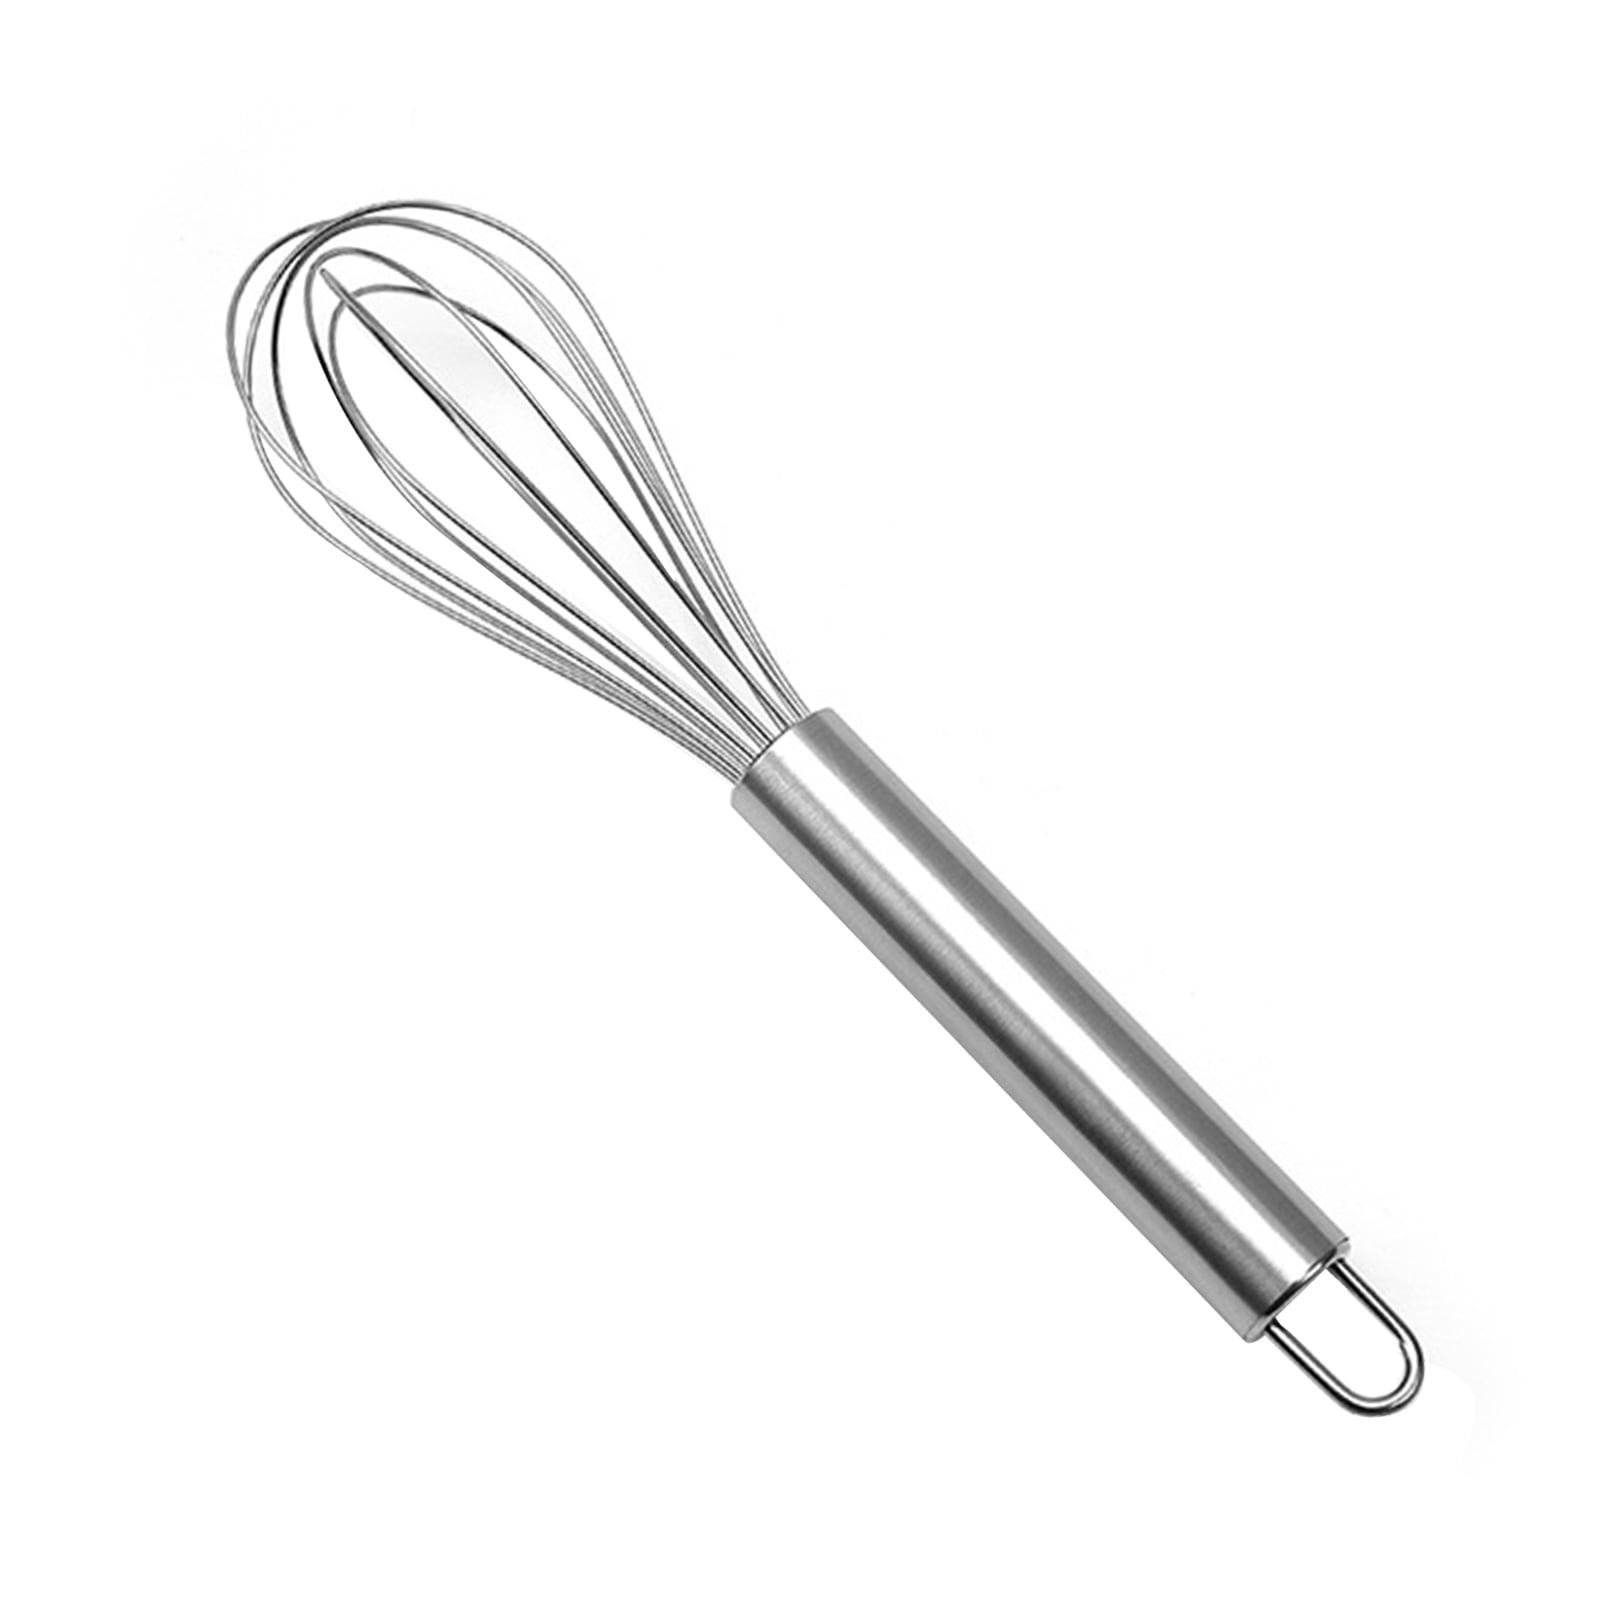 STAINLESS STEEL SAUCE WHISK WITH HOOK - PURCHASE OF KITCHEN UTENSILS Choix  longueur (cm) 25